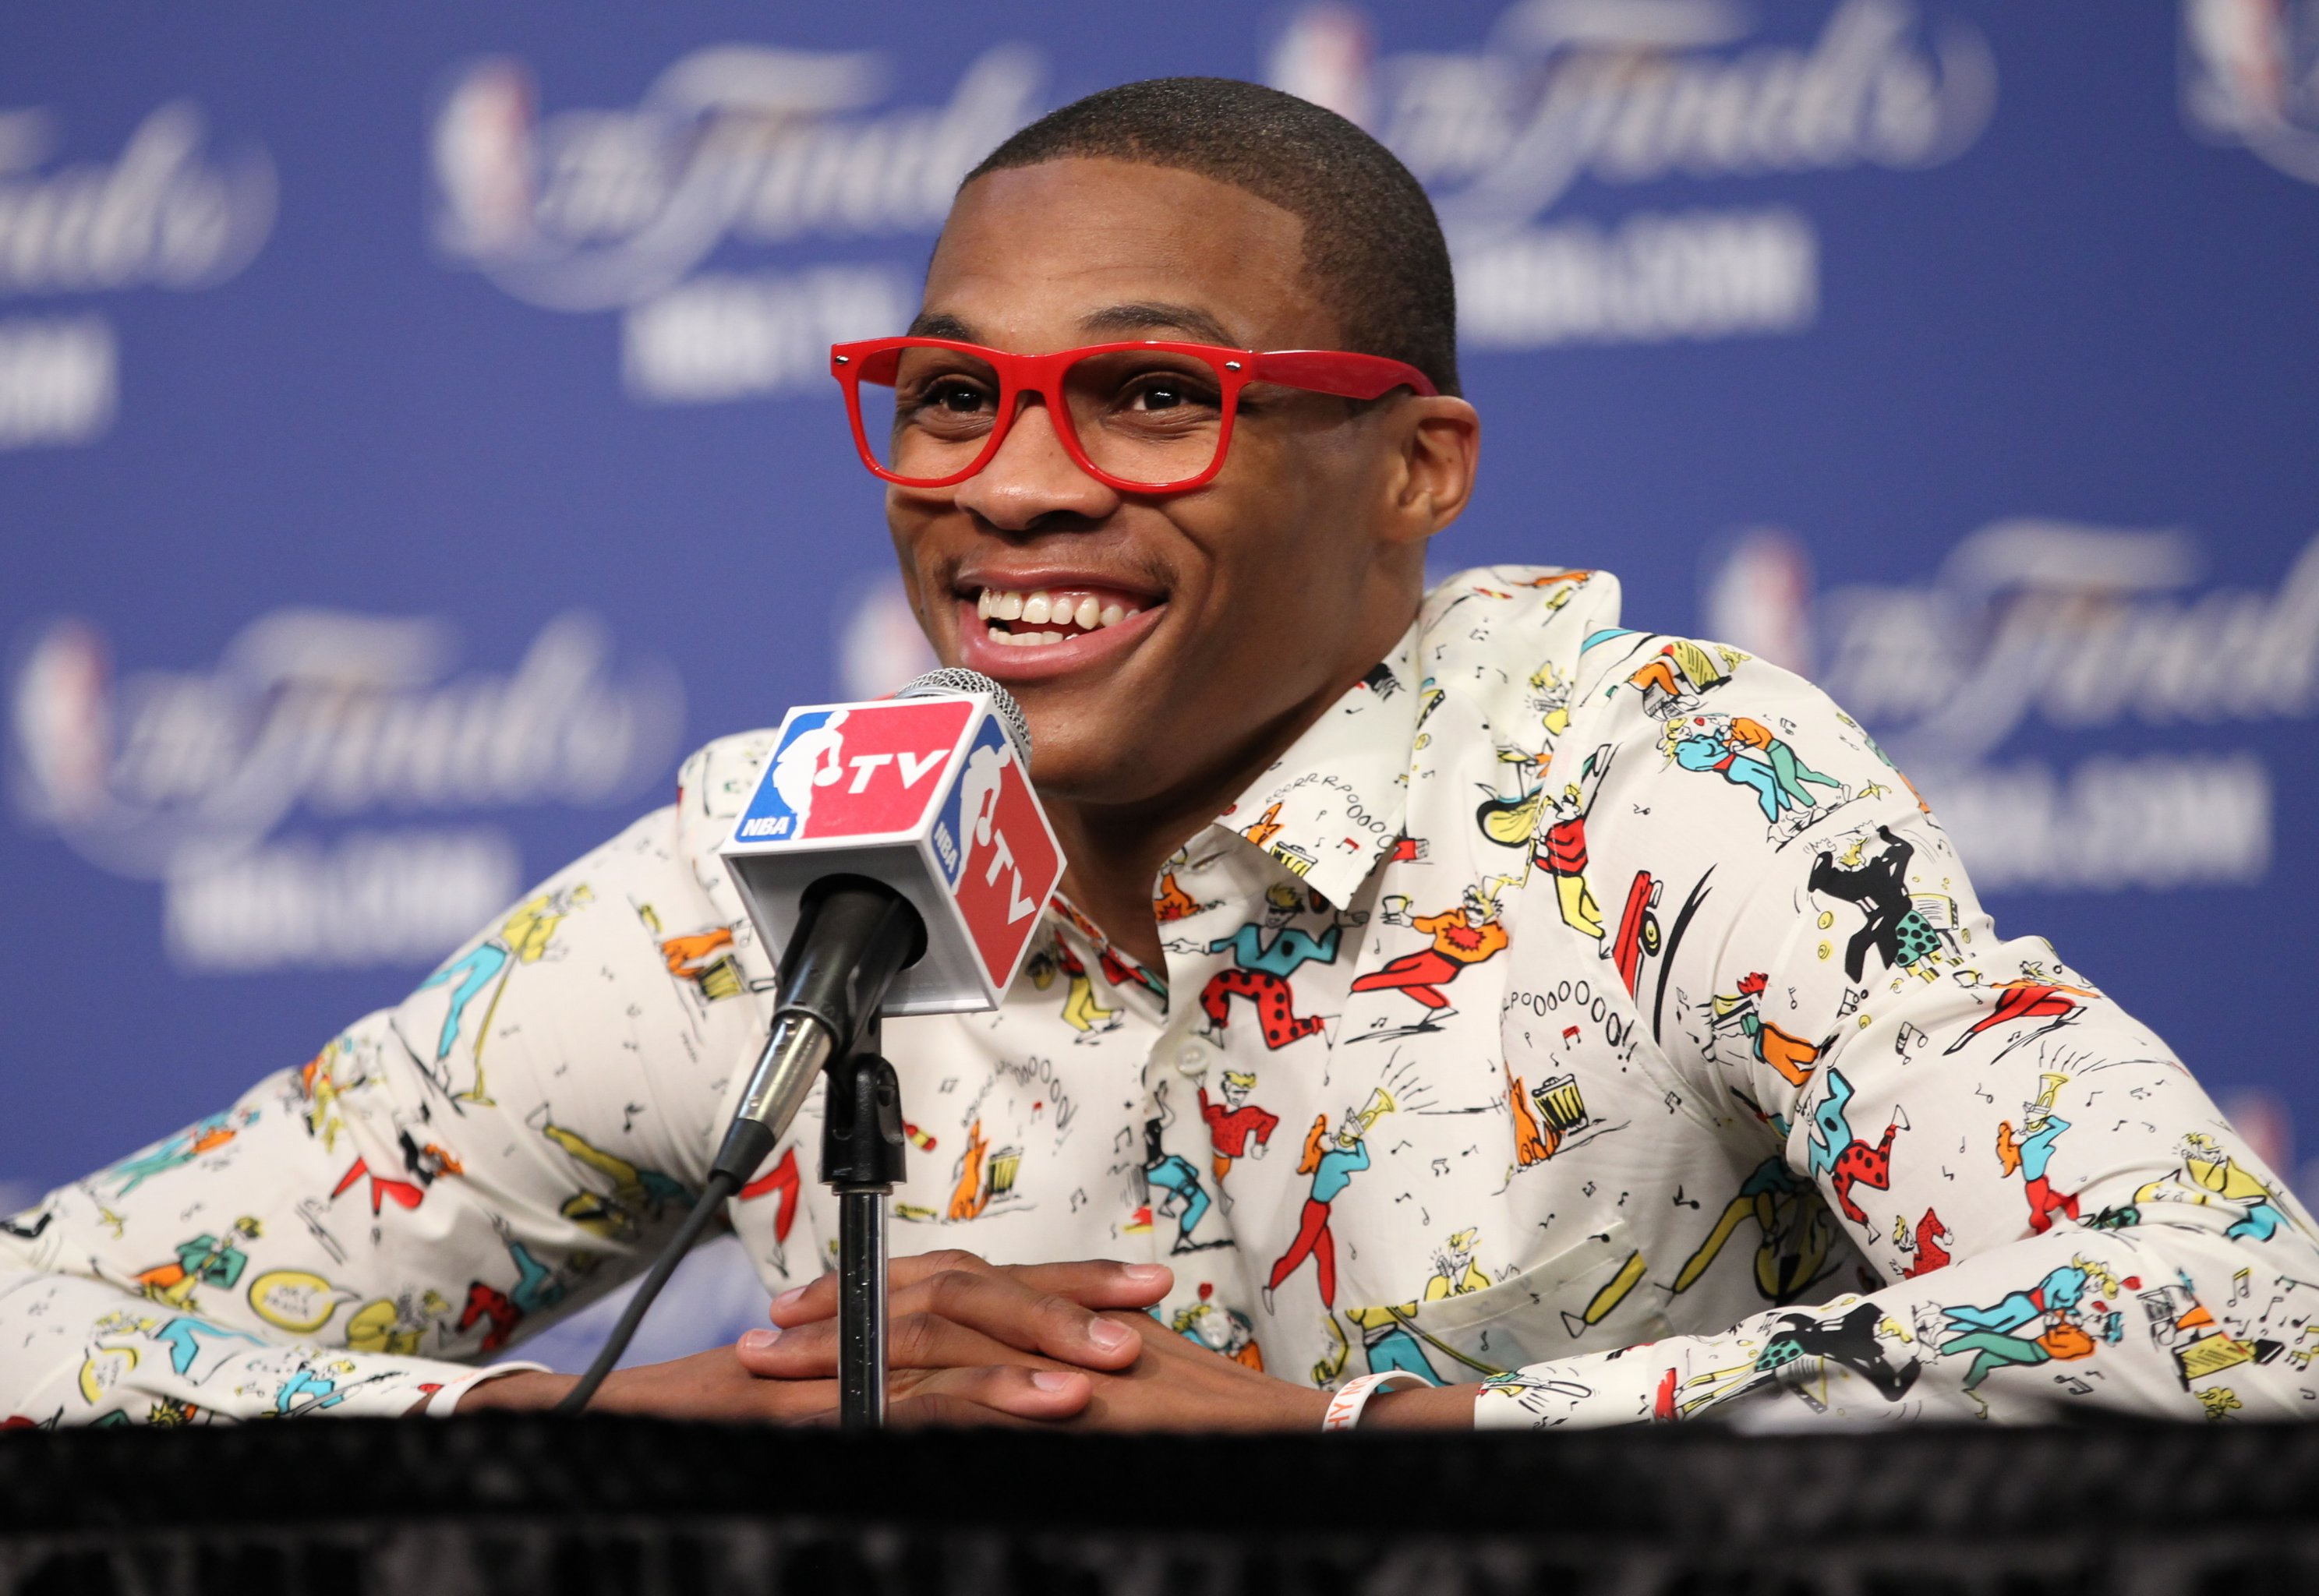 Fashion Fast Break: The Best And Worst Dressed Players In The NBA